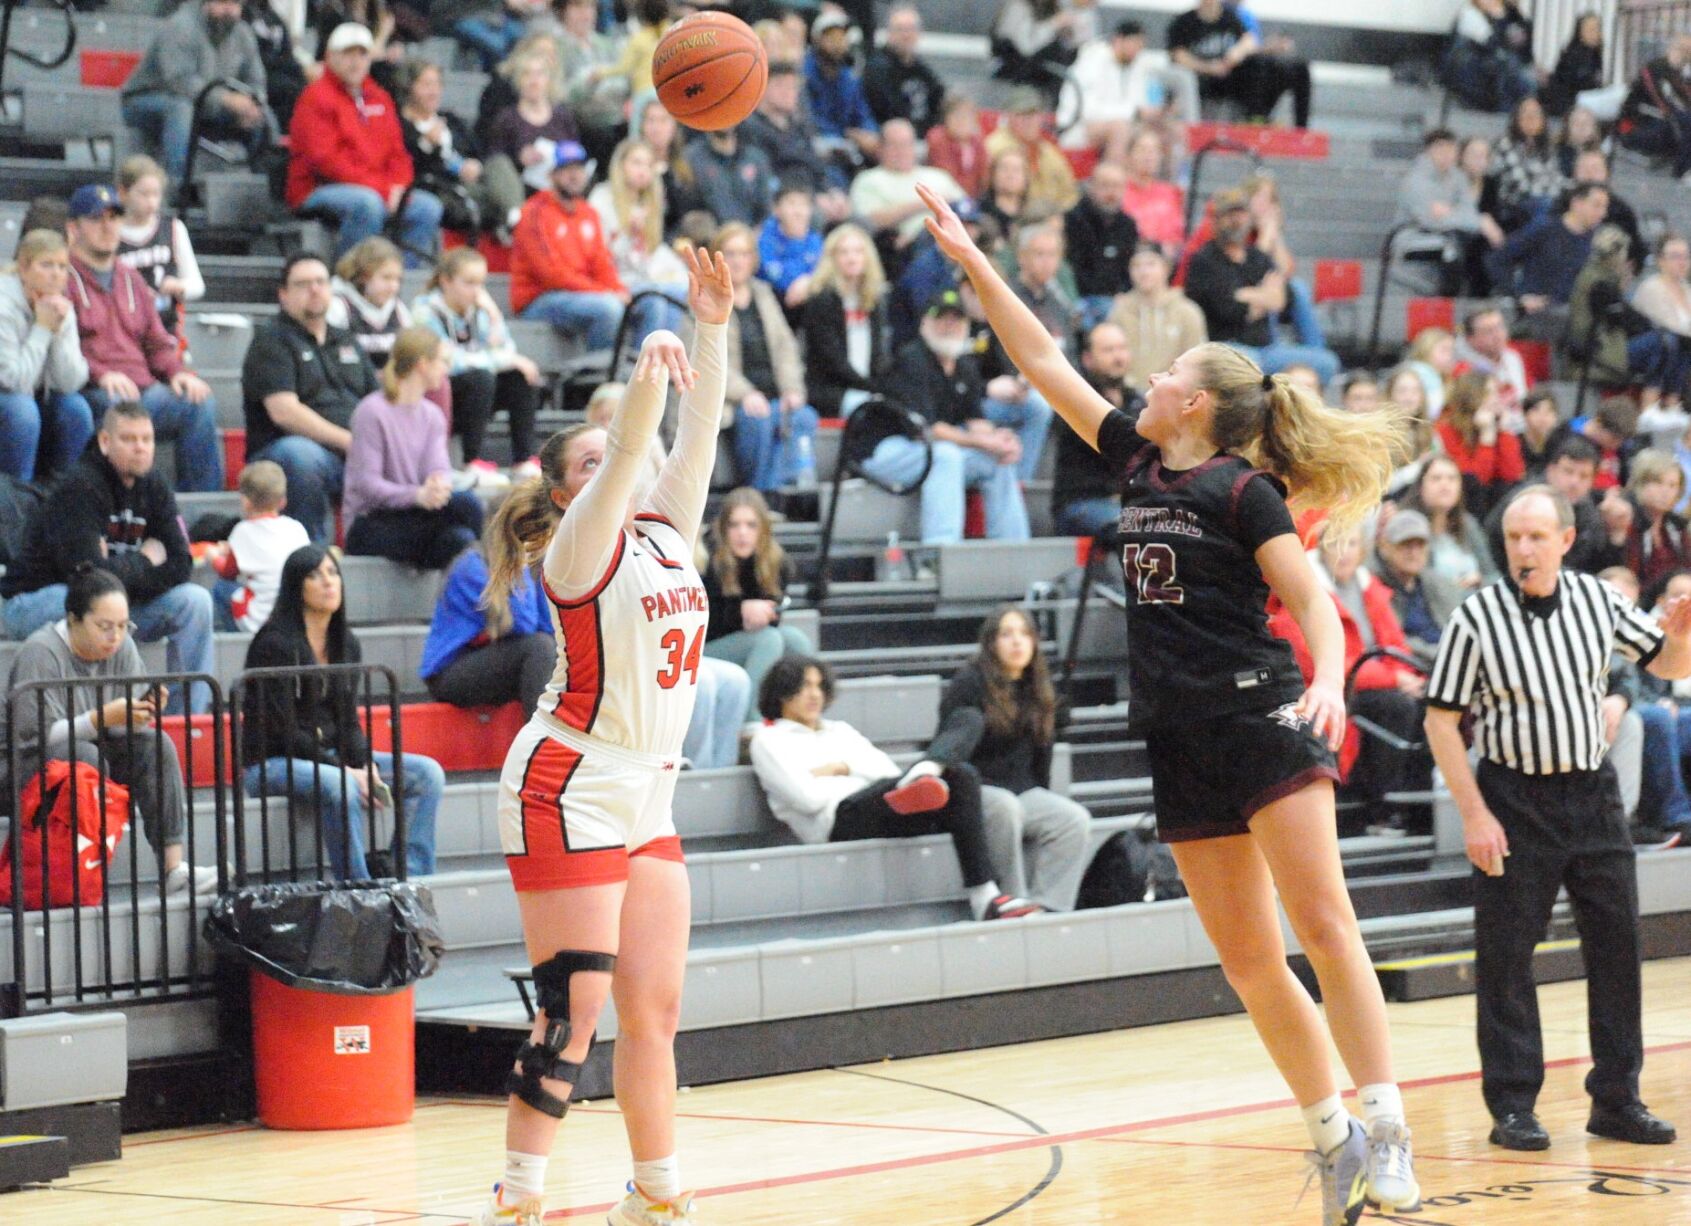 Wilmot Girls Basketball Struggle Through Challenging Season; Christian Life Eagles Led by Lilly Lackenbach in Scoring